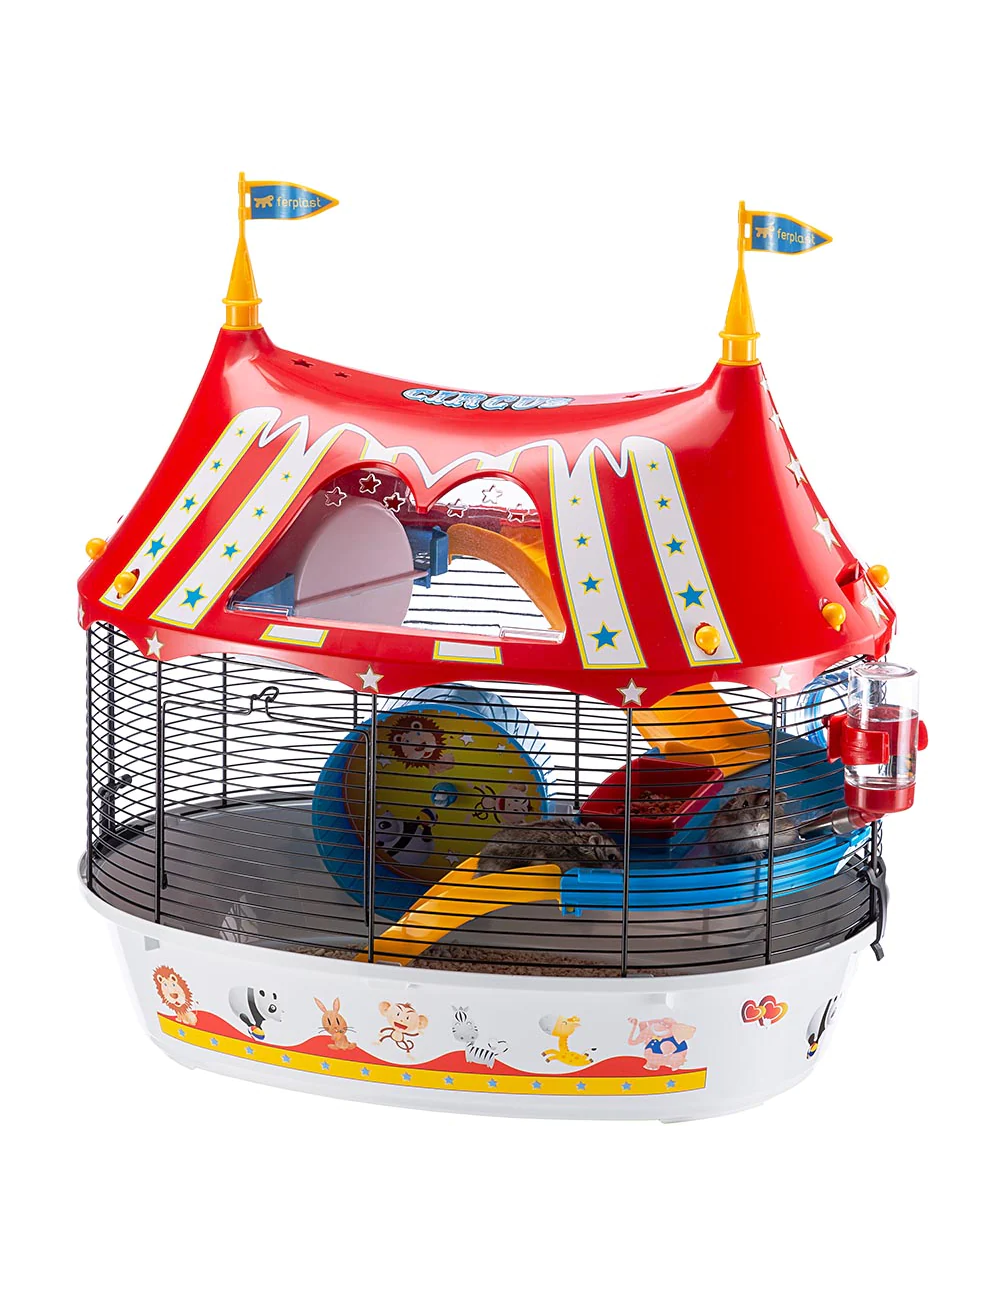 FERPLAST - “Circus Fun” Cage for Mouse and Hamster